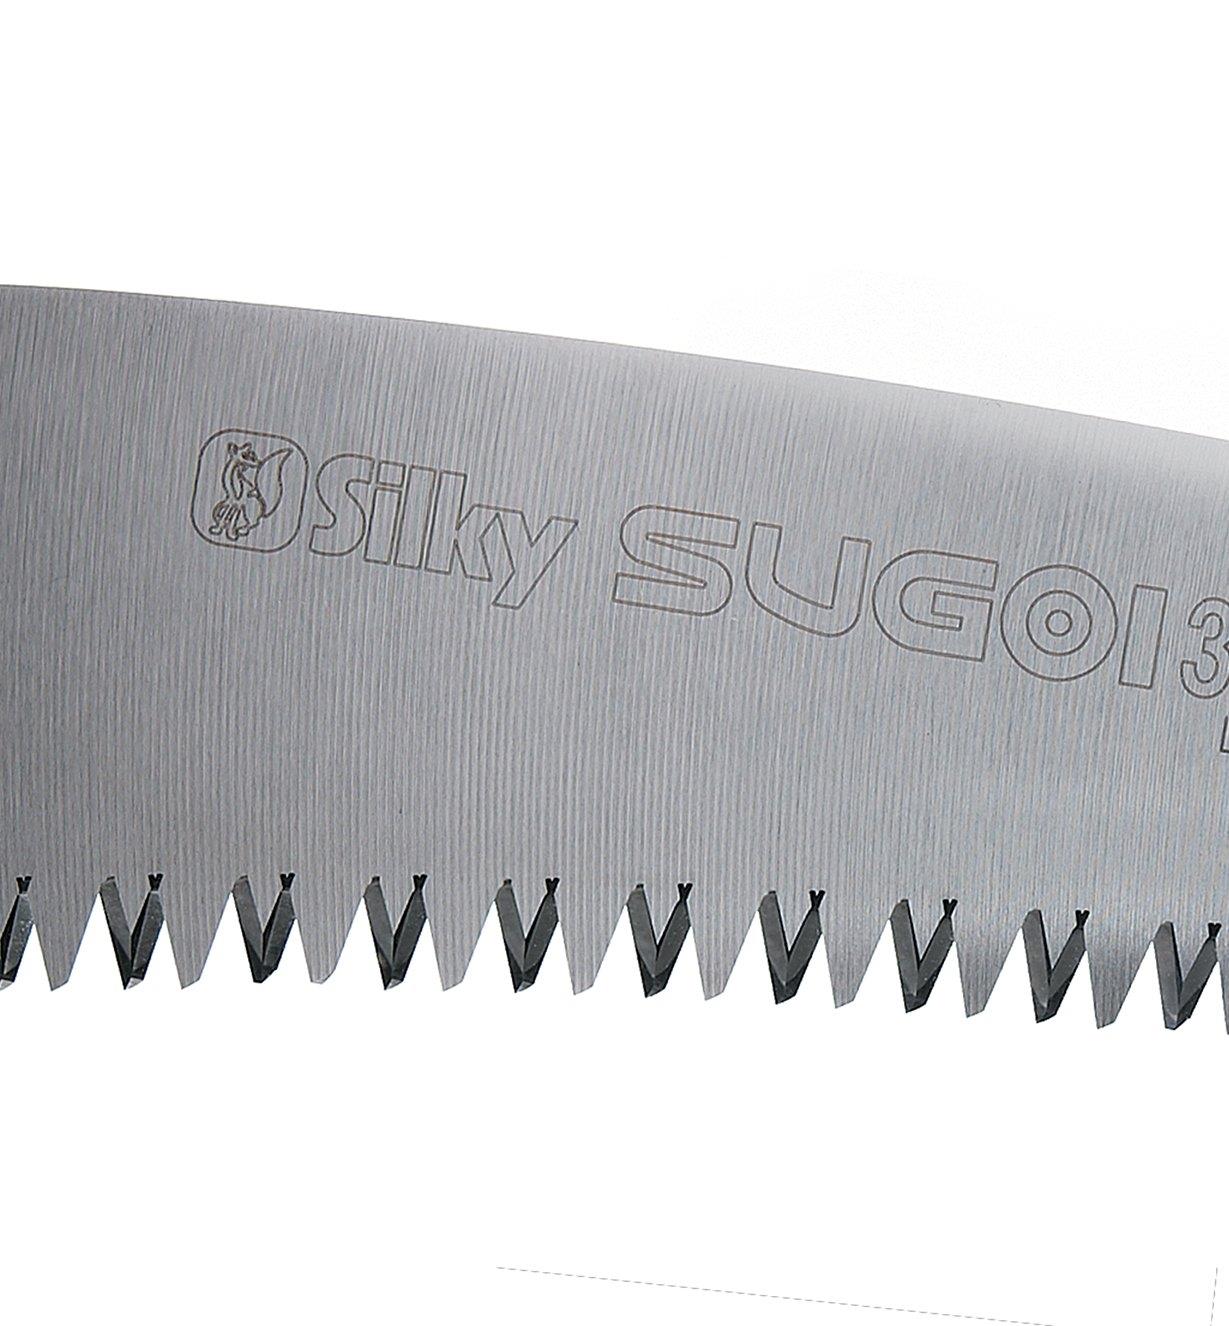 Close-up of Silky Sugoi 360 Pruning Saw blade